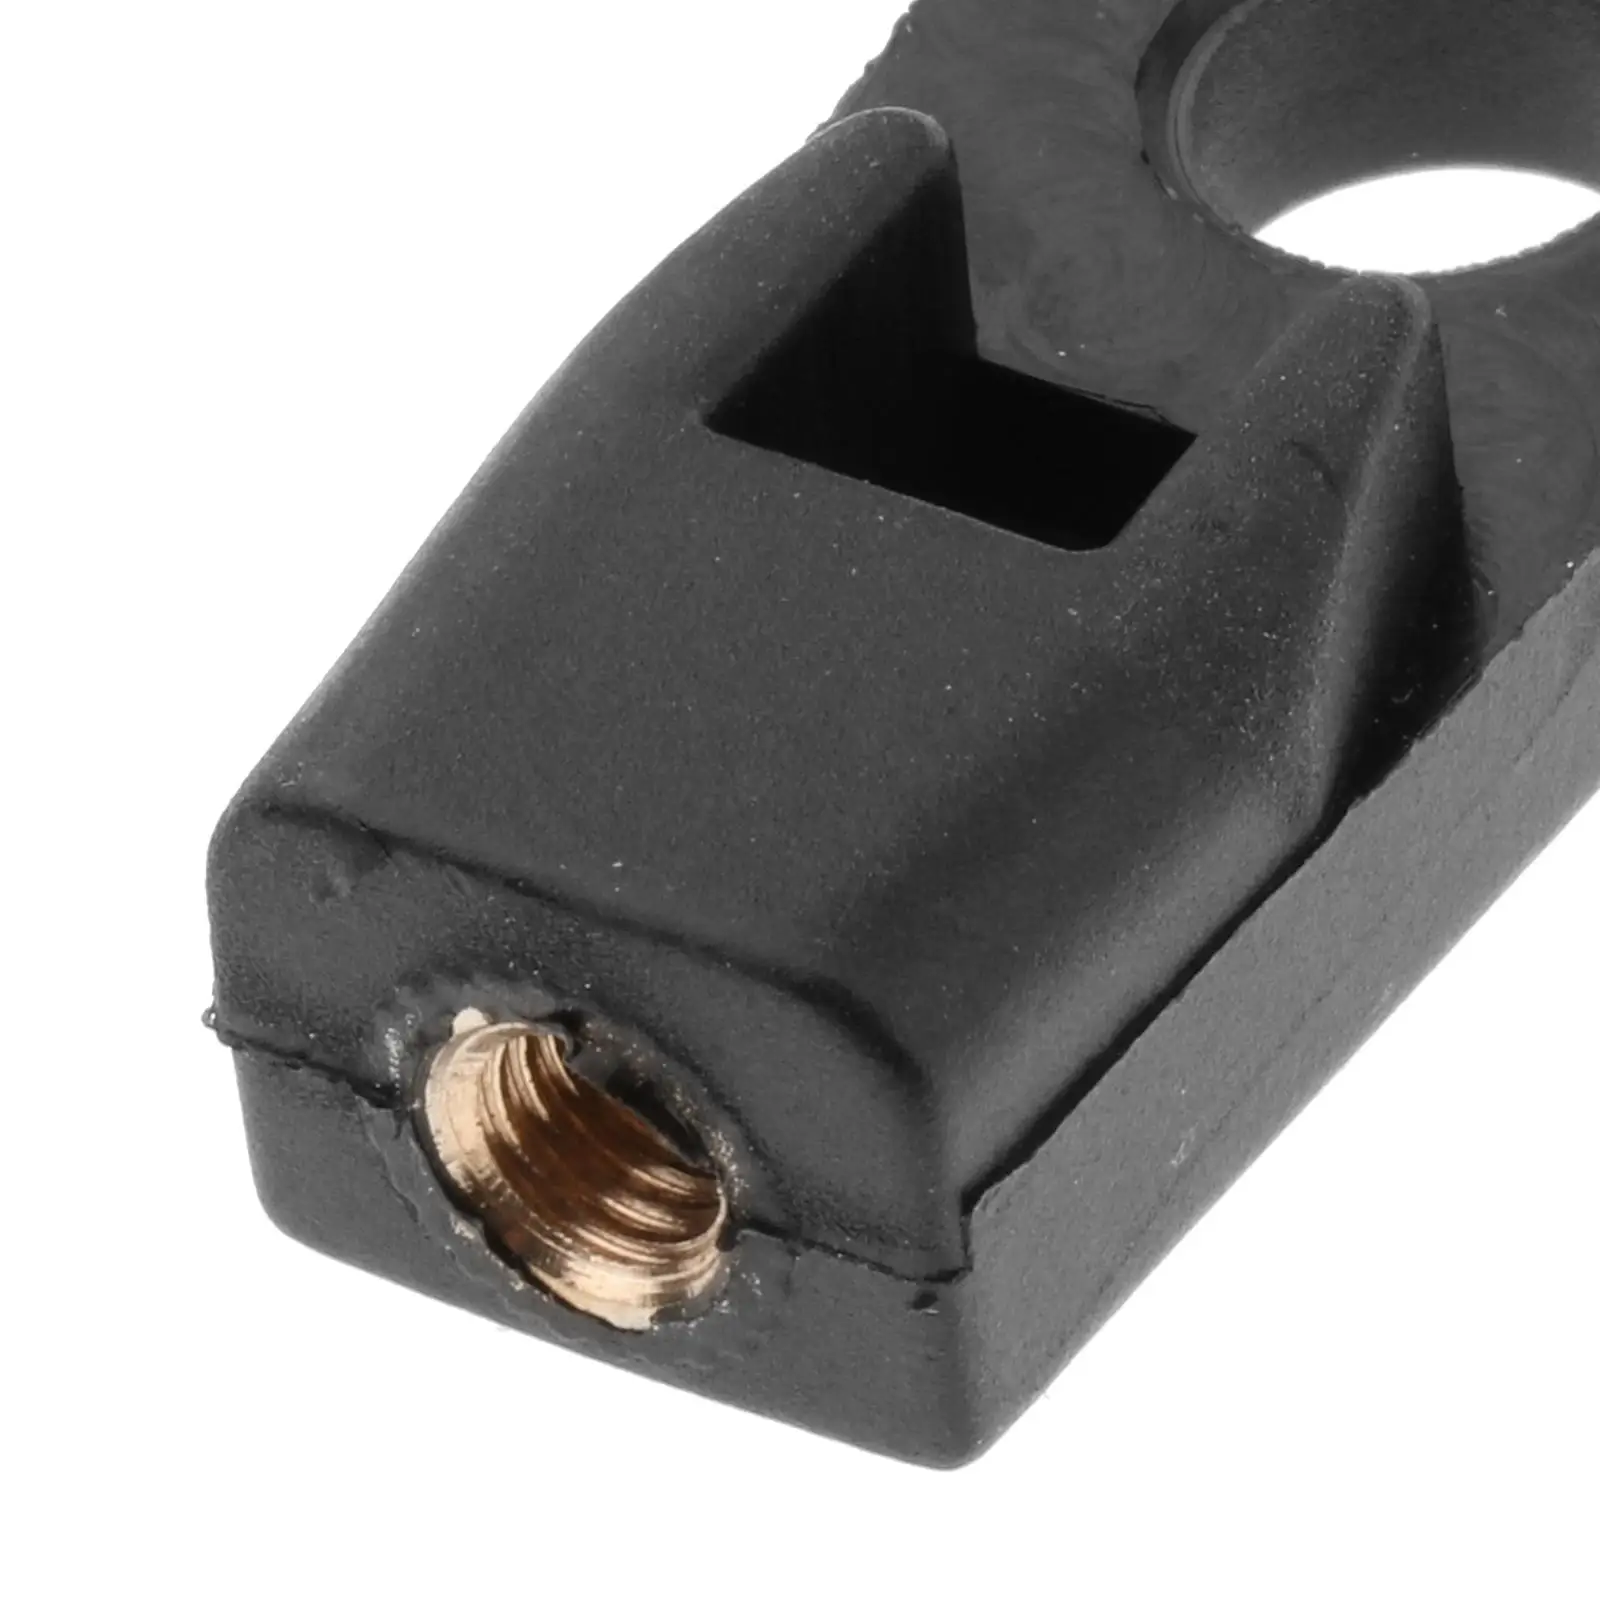 Cable End Connector for Suzuki Outboard Engine Durable Easy to Install